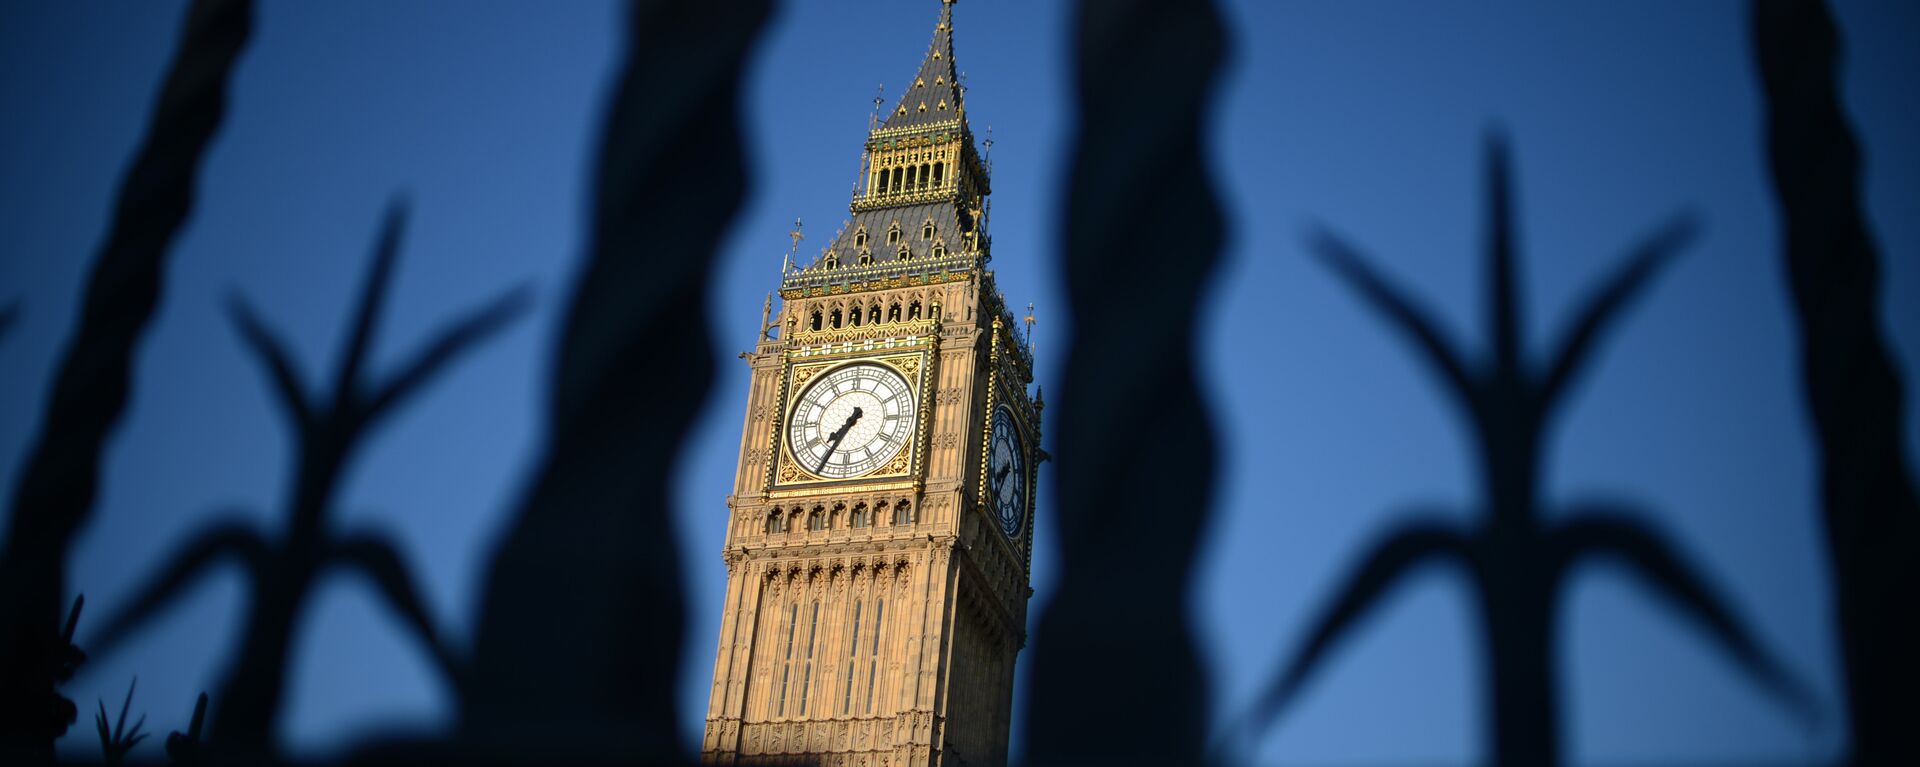 The Big Ben clock Tower is pictured in central London on July 22, 2012, five days before the start of the London 2012 Olympic Games. - Sputnik Mundo, 1920, 29.11.2021